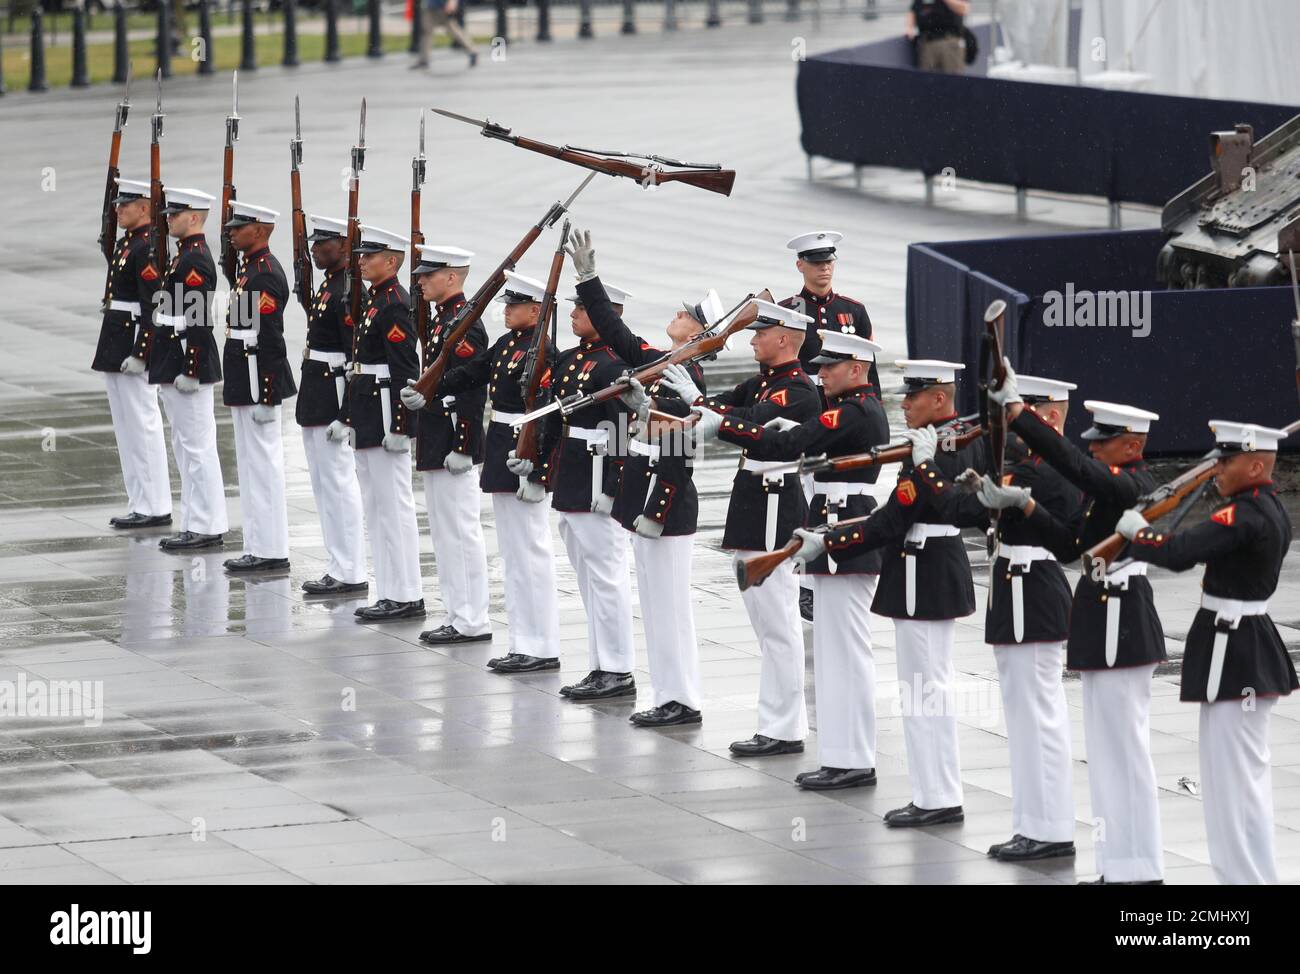 The U.S. Marine Corps Silent Drill Platoon takes part in Fourth of July Independence Day celebrations at the Lincoln Memorial in Washington, D.C., U.S., July 4, 2019. REUTERS/Tom Brenner Stock Photo